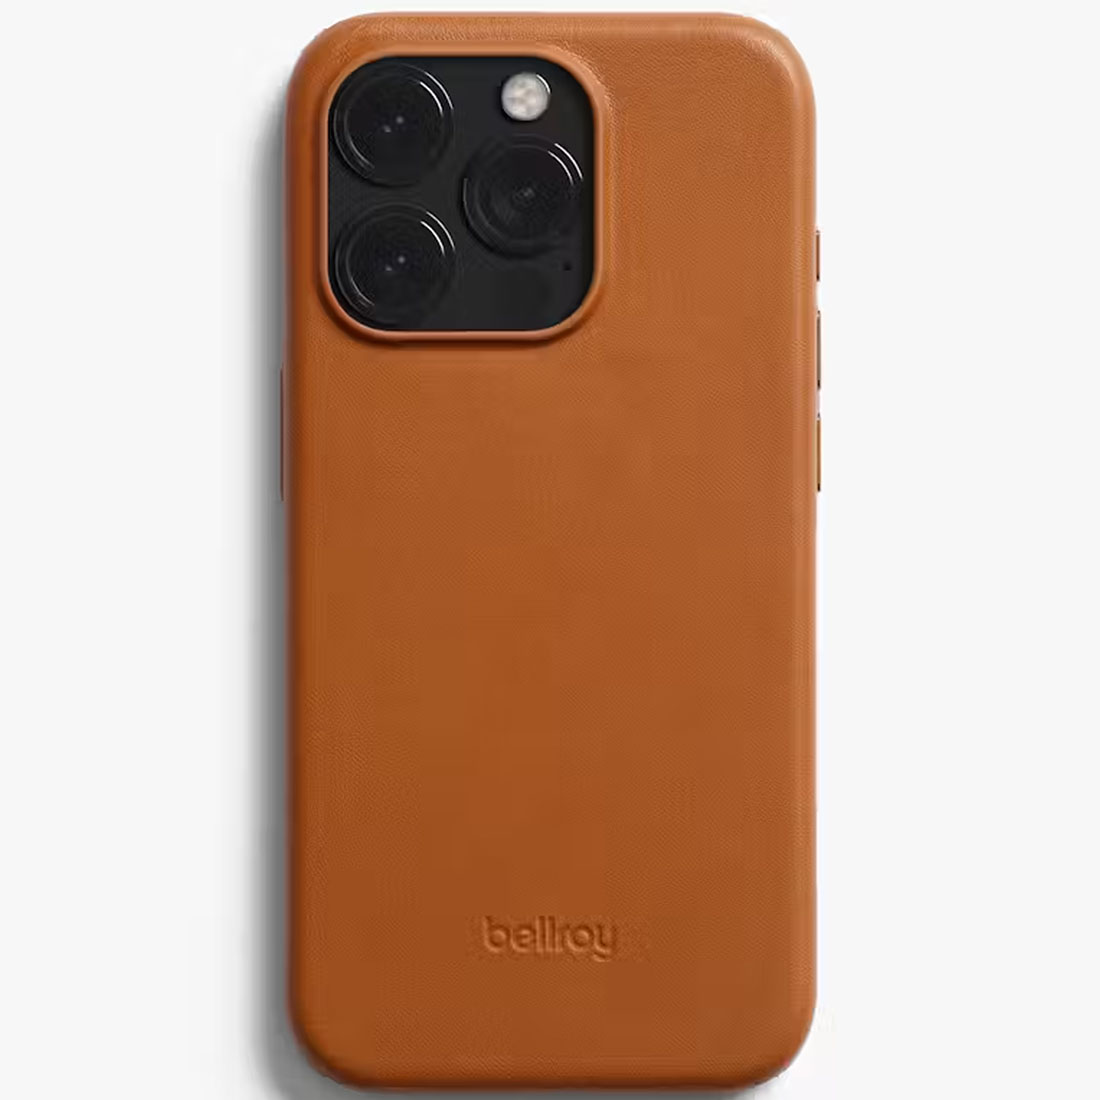 bellroy leather iphone in terracotta